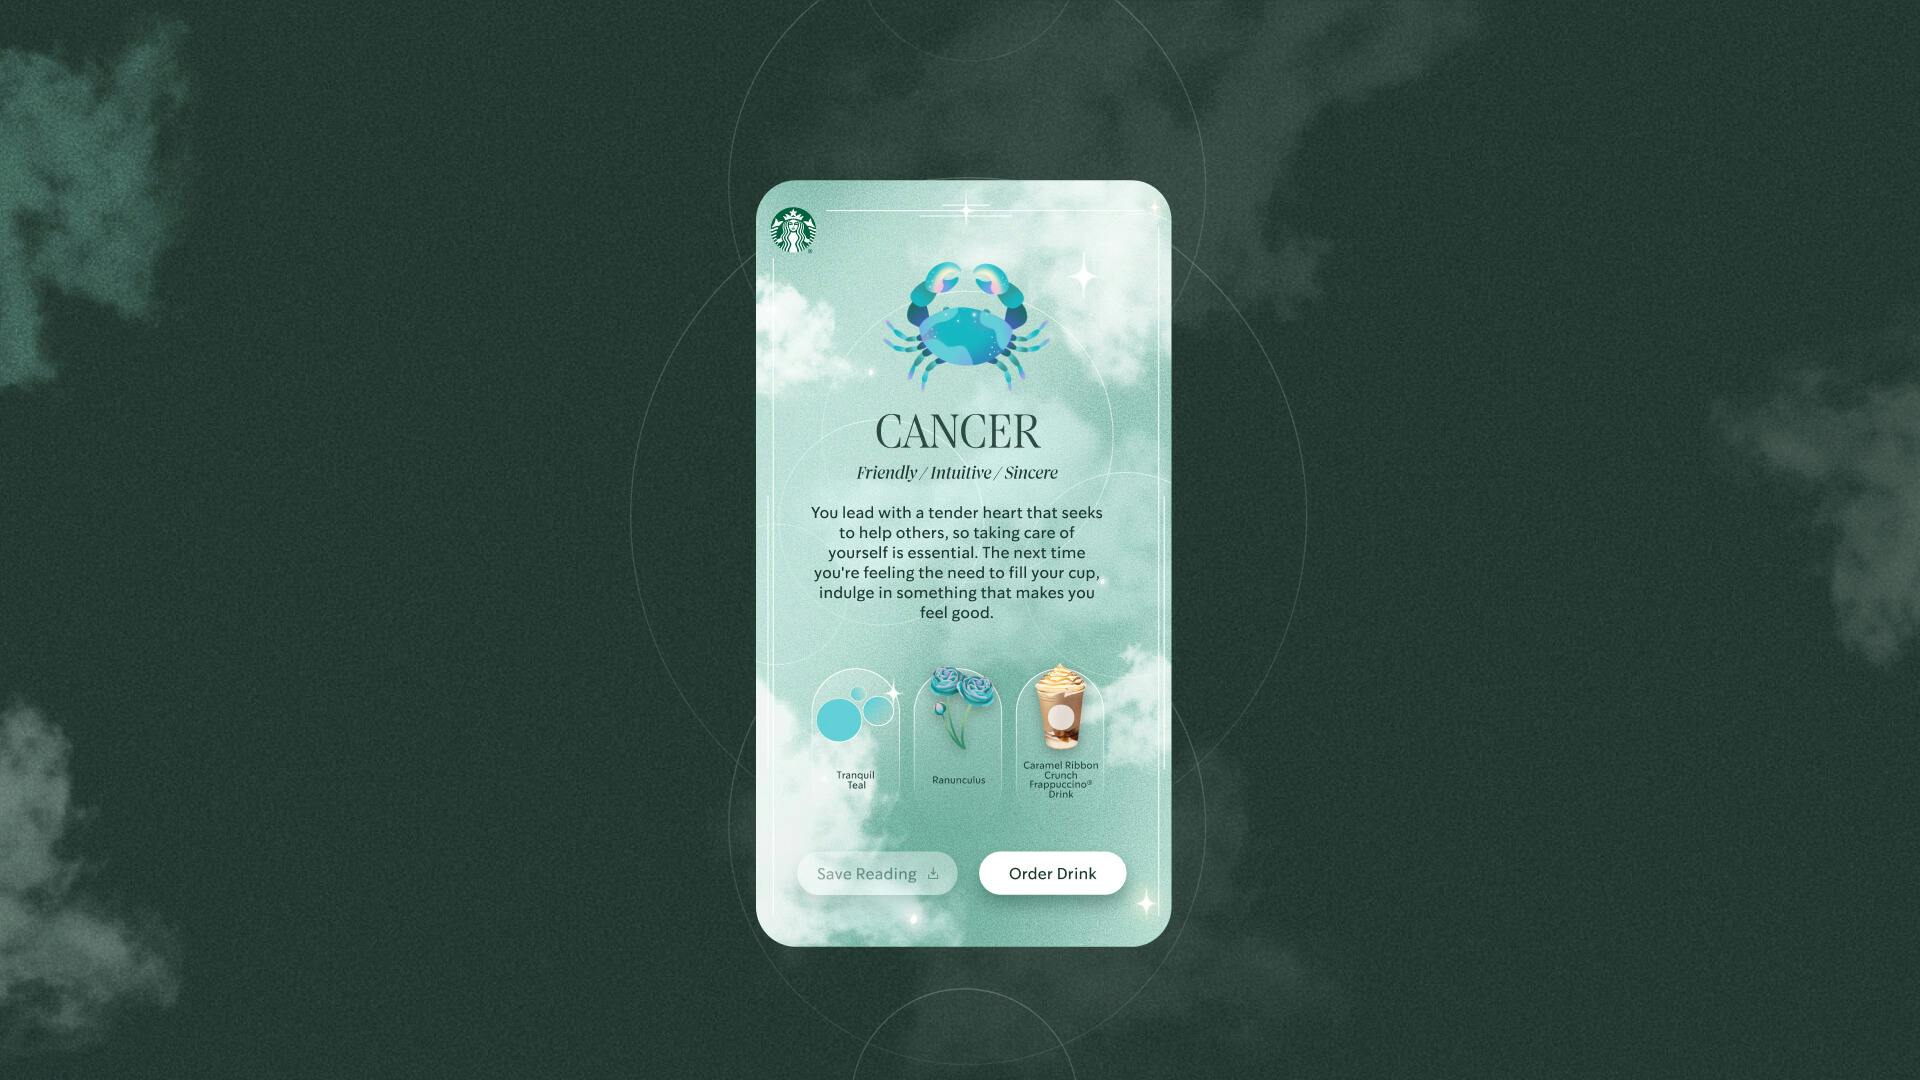 This user interface design feautures the zodiac sign cancer's horoscope and tells users which starbucks beverage they should try. 